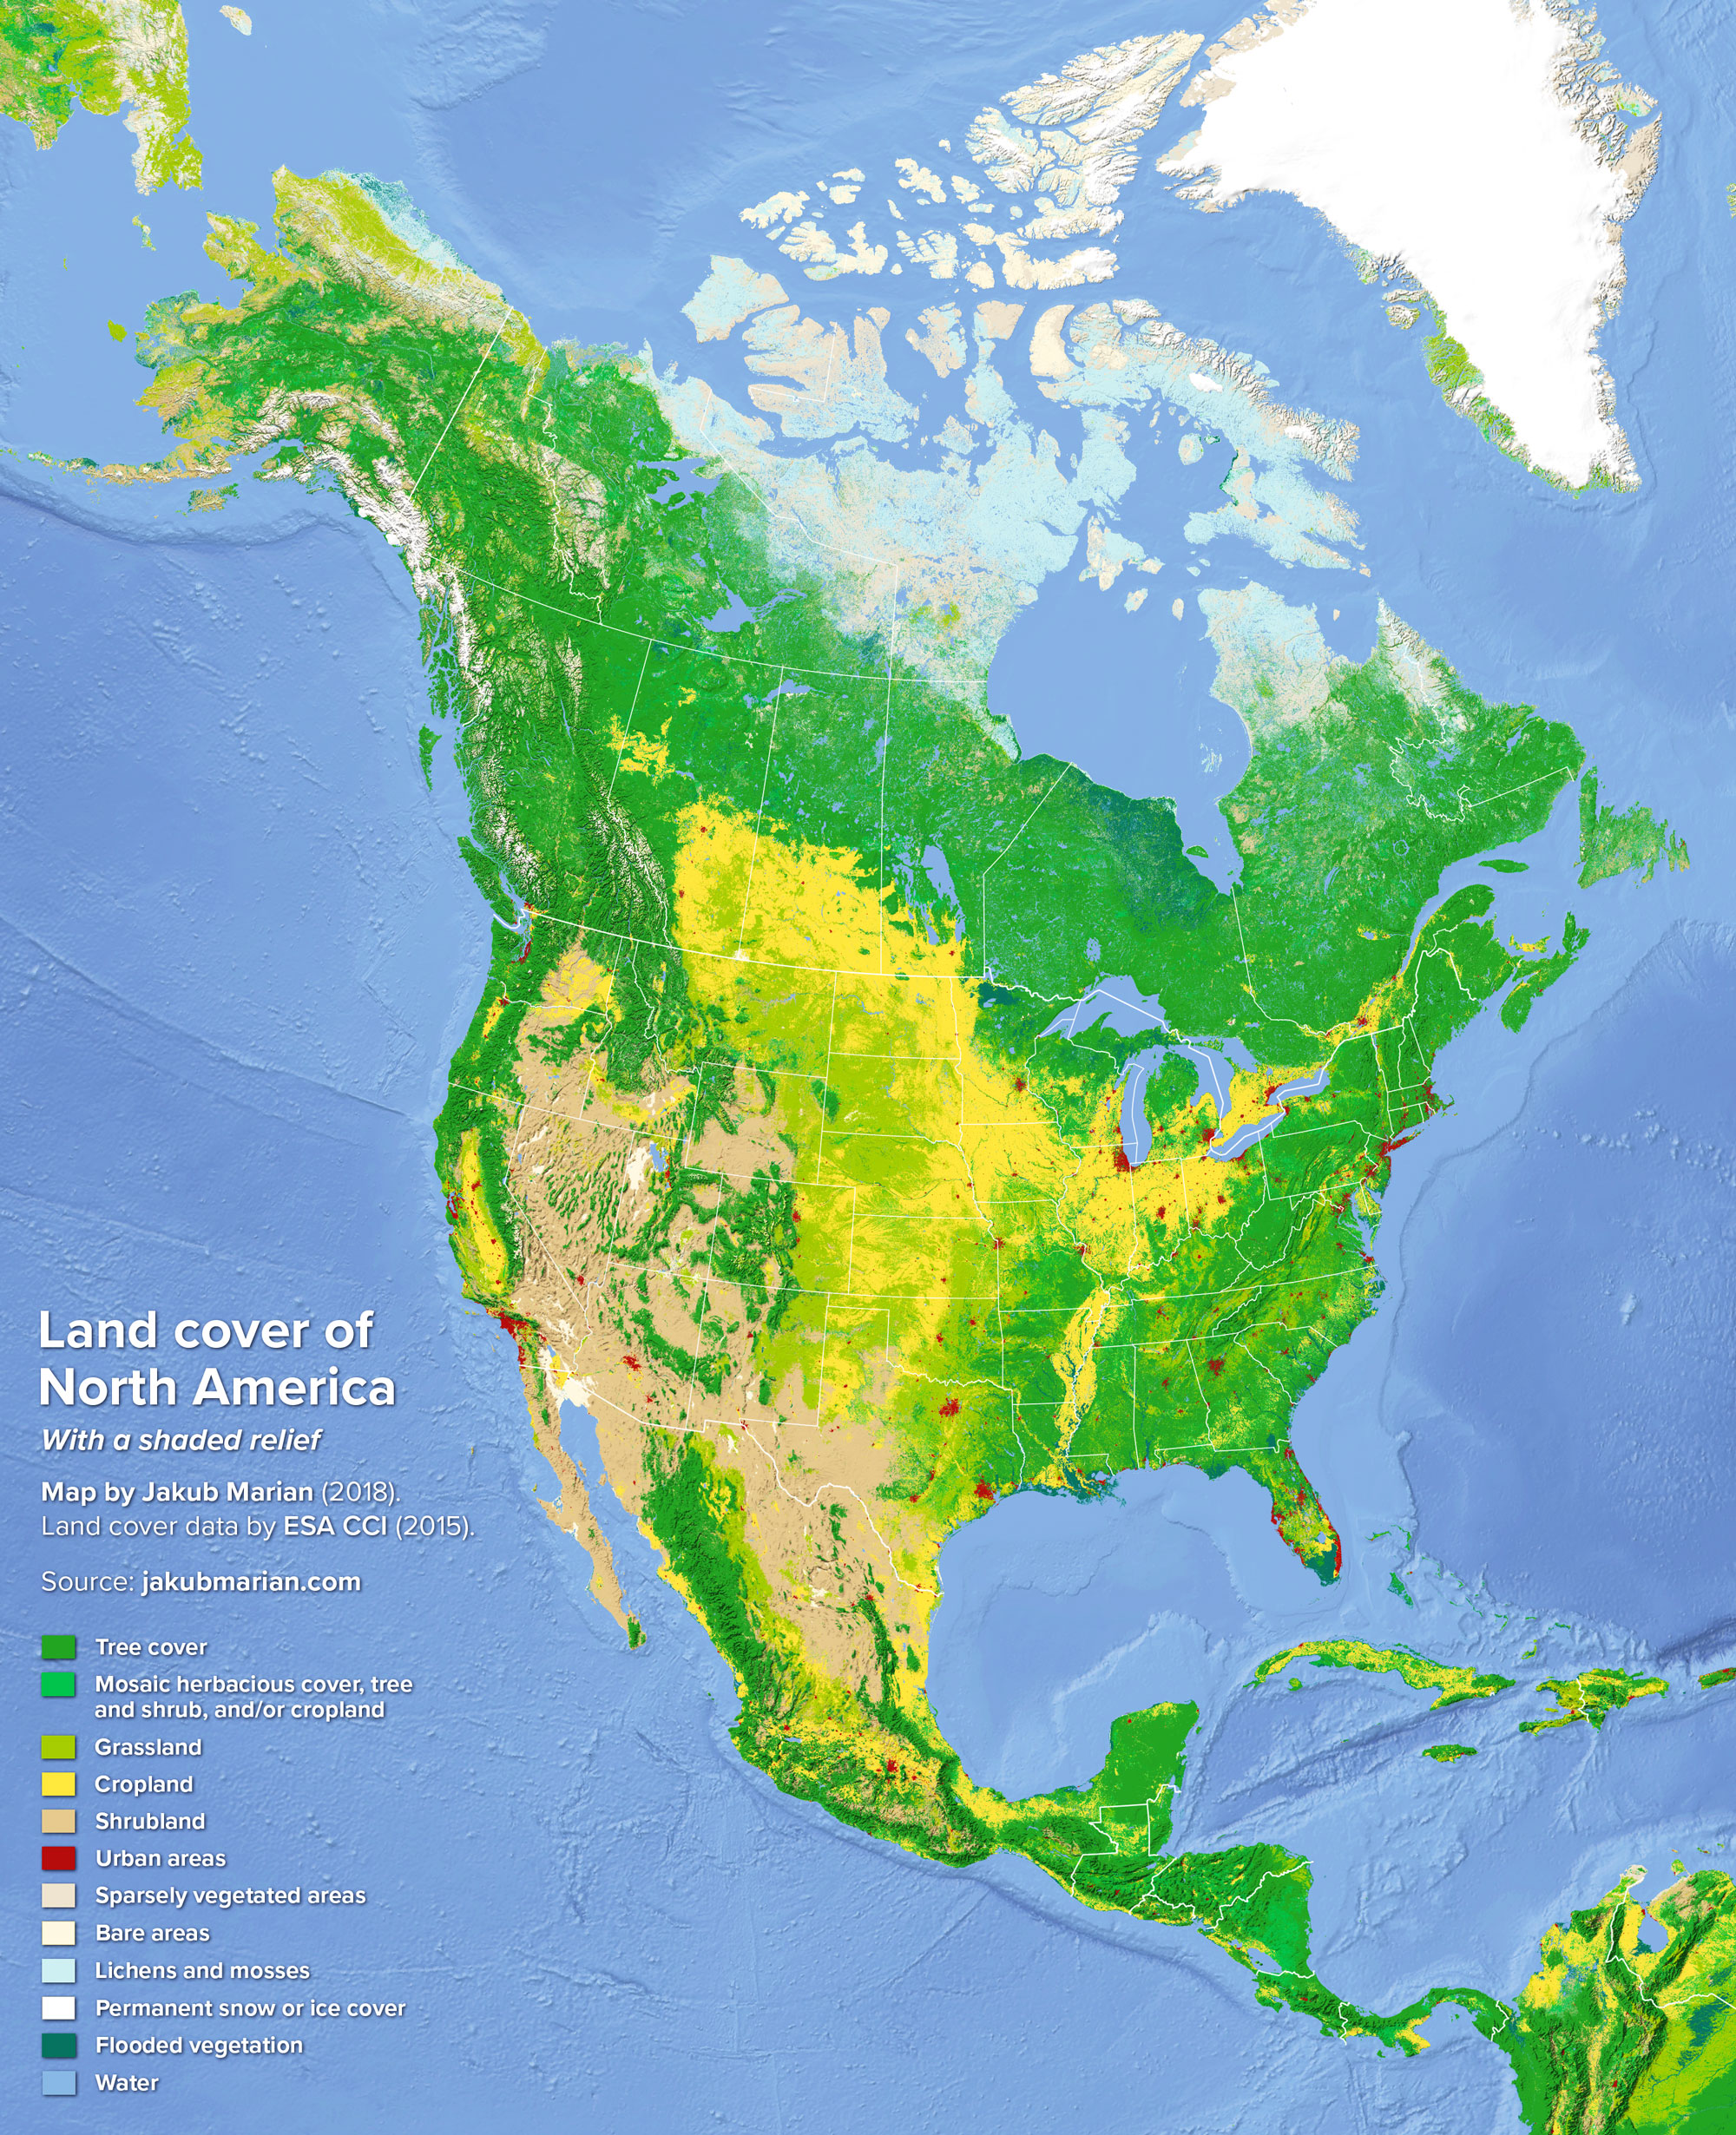 Land cover of North America